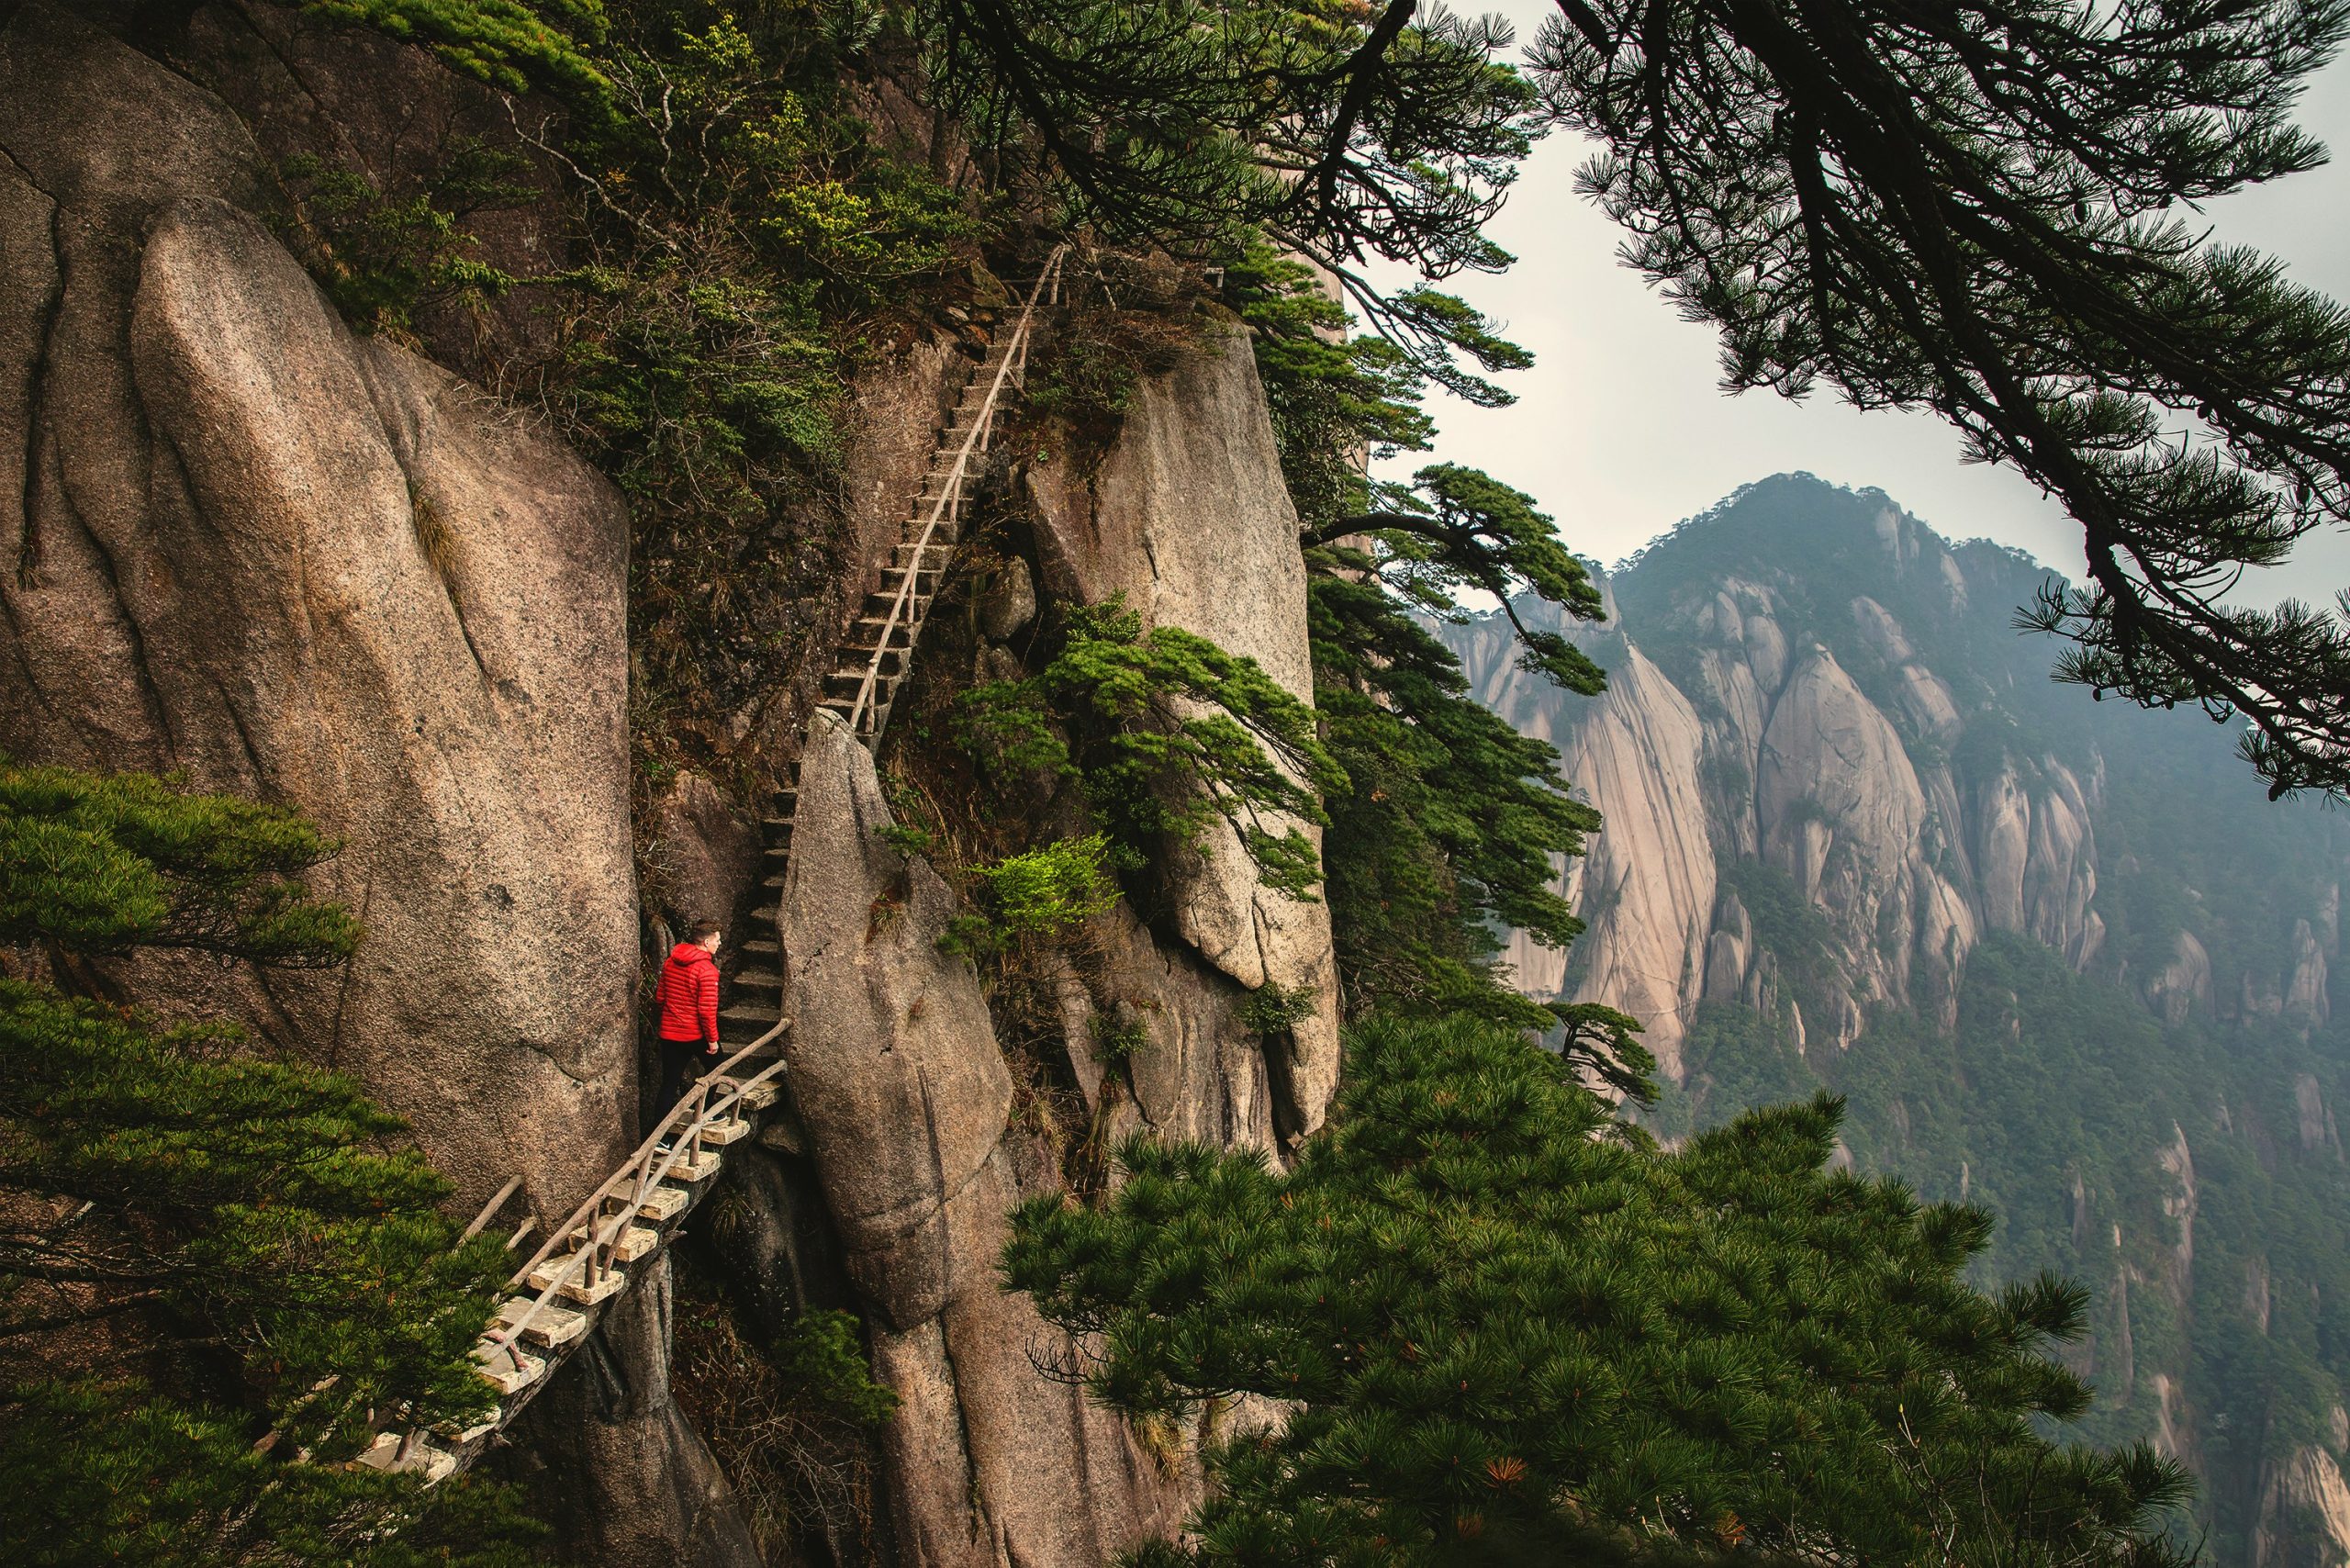 discover the beauty of huangshan through thrilling trekking adventures surrounded by stunning natural landscapes.